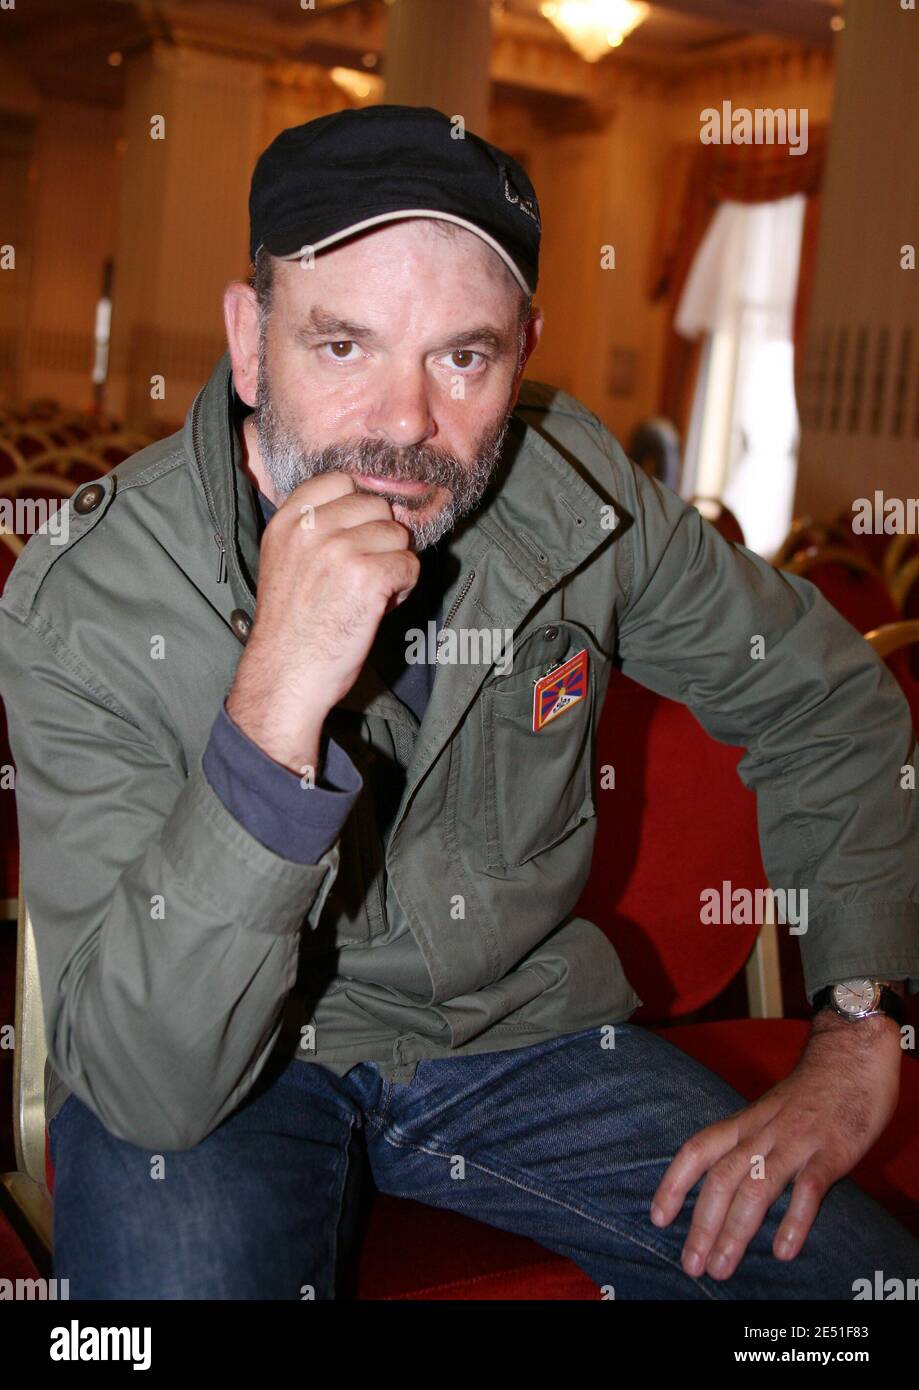 EXCLUSIVE. Actor Jean-Pierre Darroussin poses for our photographerf during the 61st Cannes Film Festival in Cannes, France on May 16, 2008. Photo by Denis Guignebourg/ABACAPRESS.COM Stock Photo